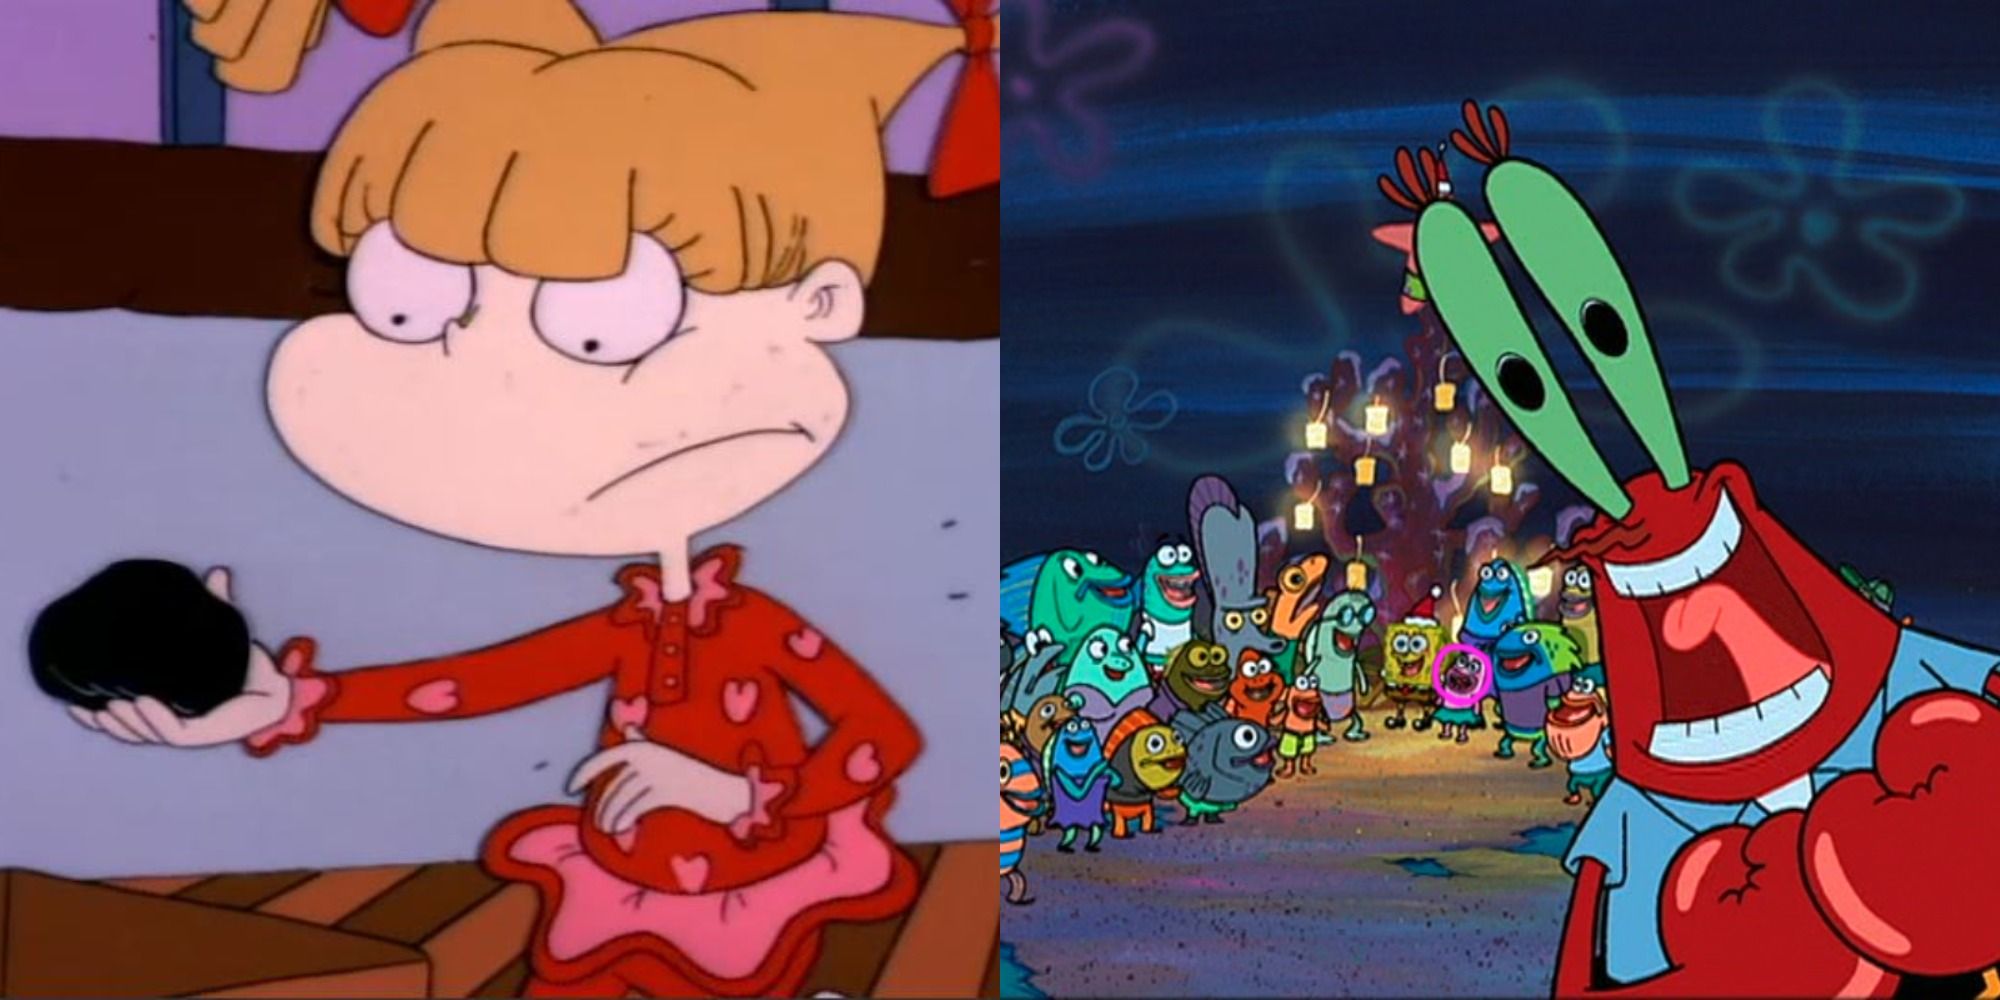 Two side by side images from Rugrats and SpongeBob SquarePants holiday episodes